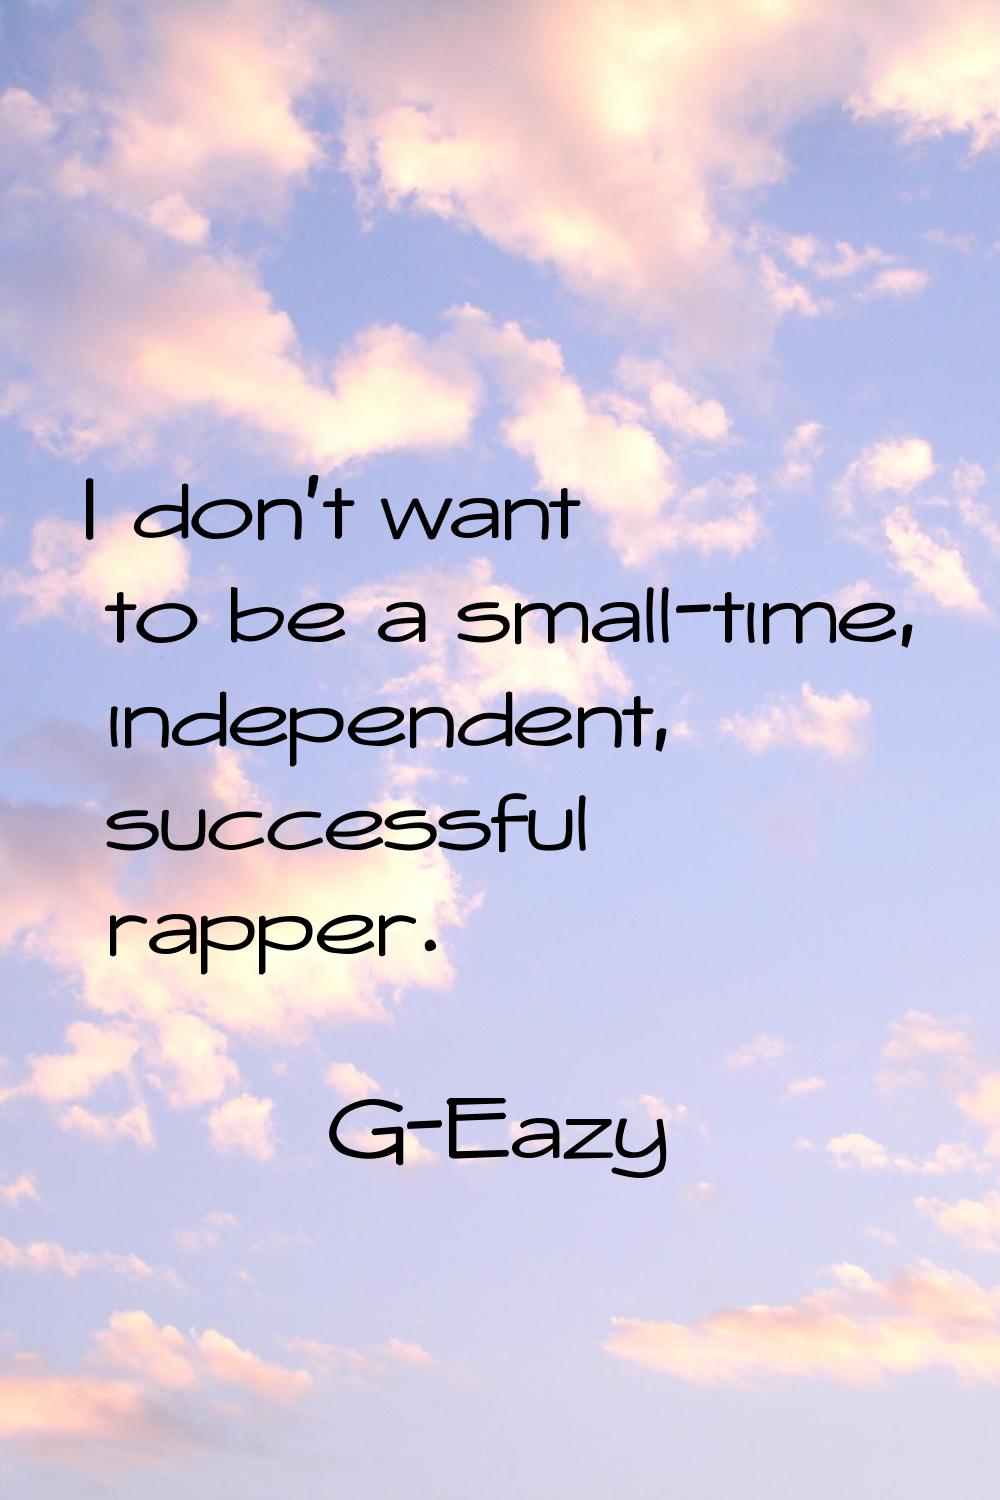 I don't want to be a small-time, independent, successful rapper.